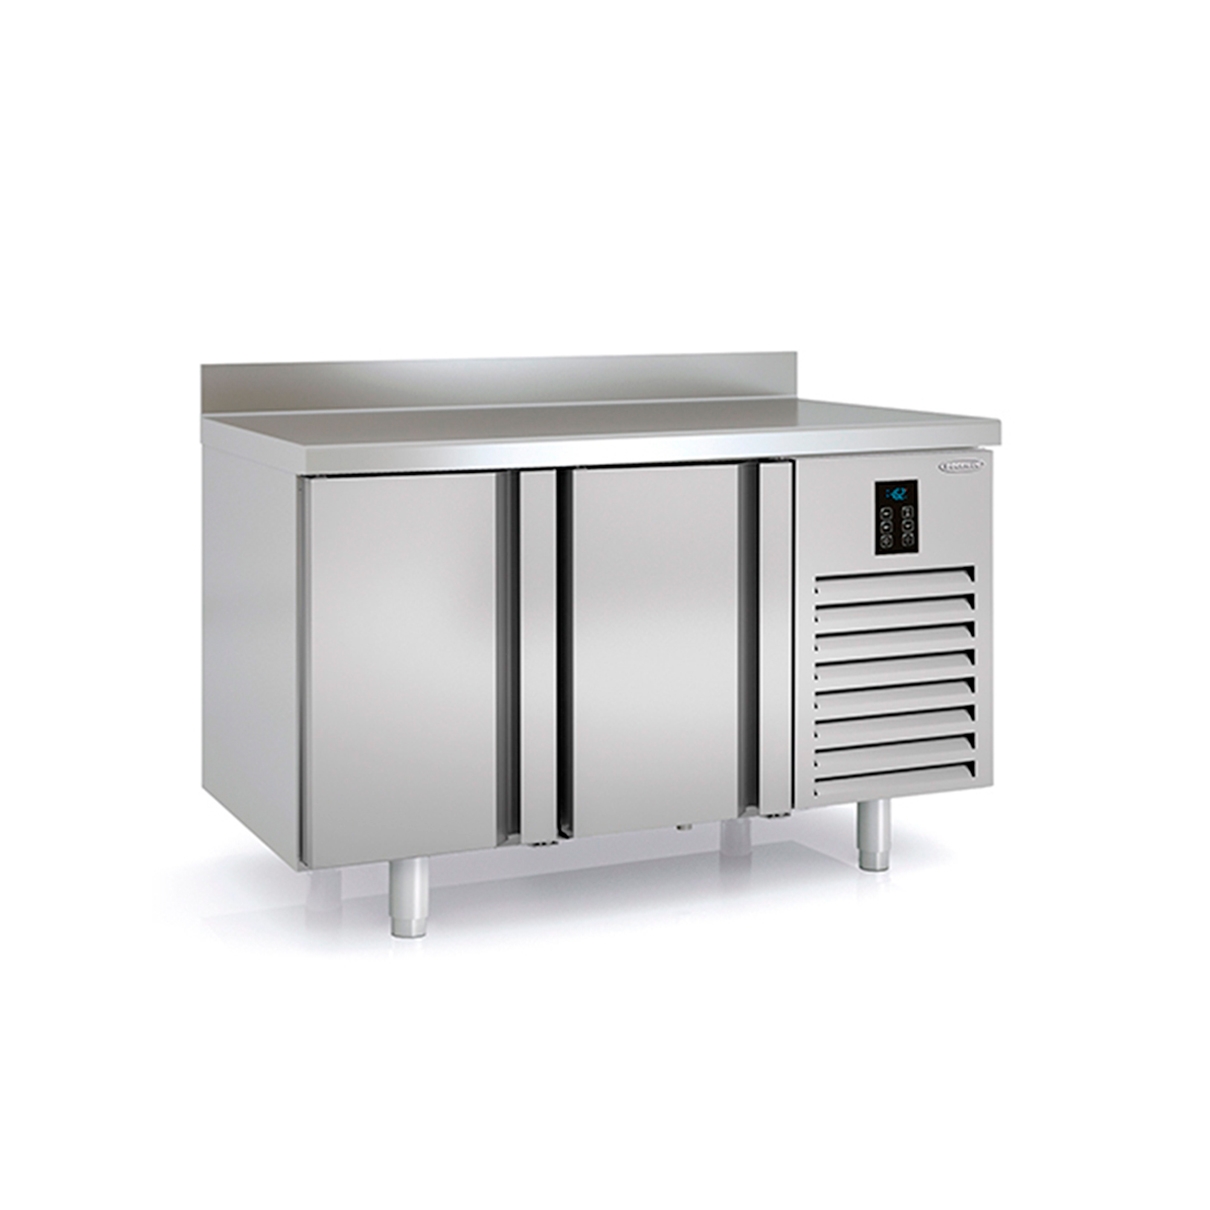 Gastronorm 1/1 High Efficiency Refrigerated Counter DHMRG